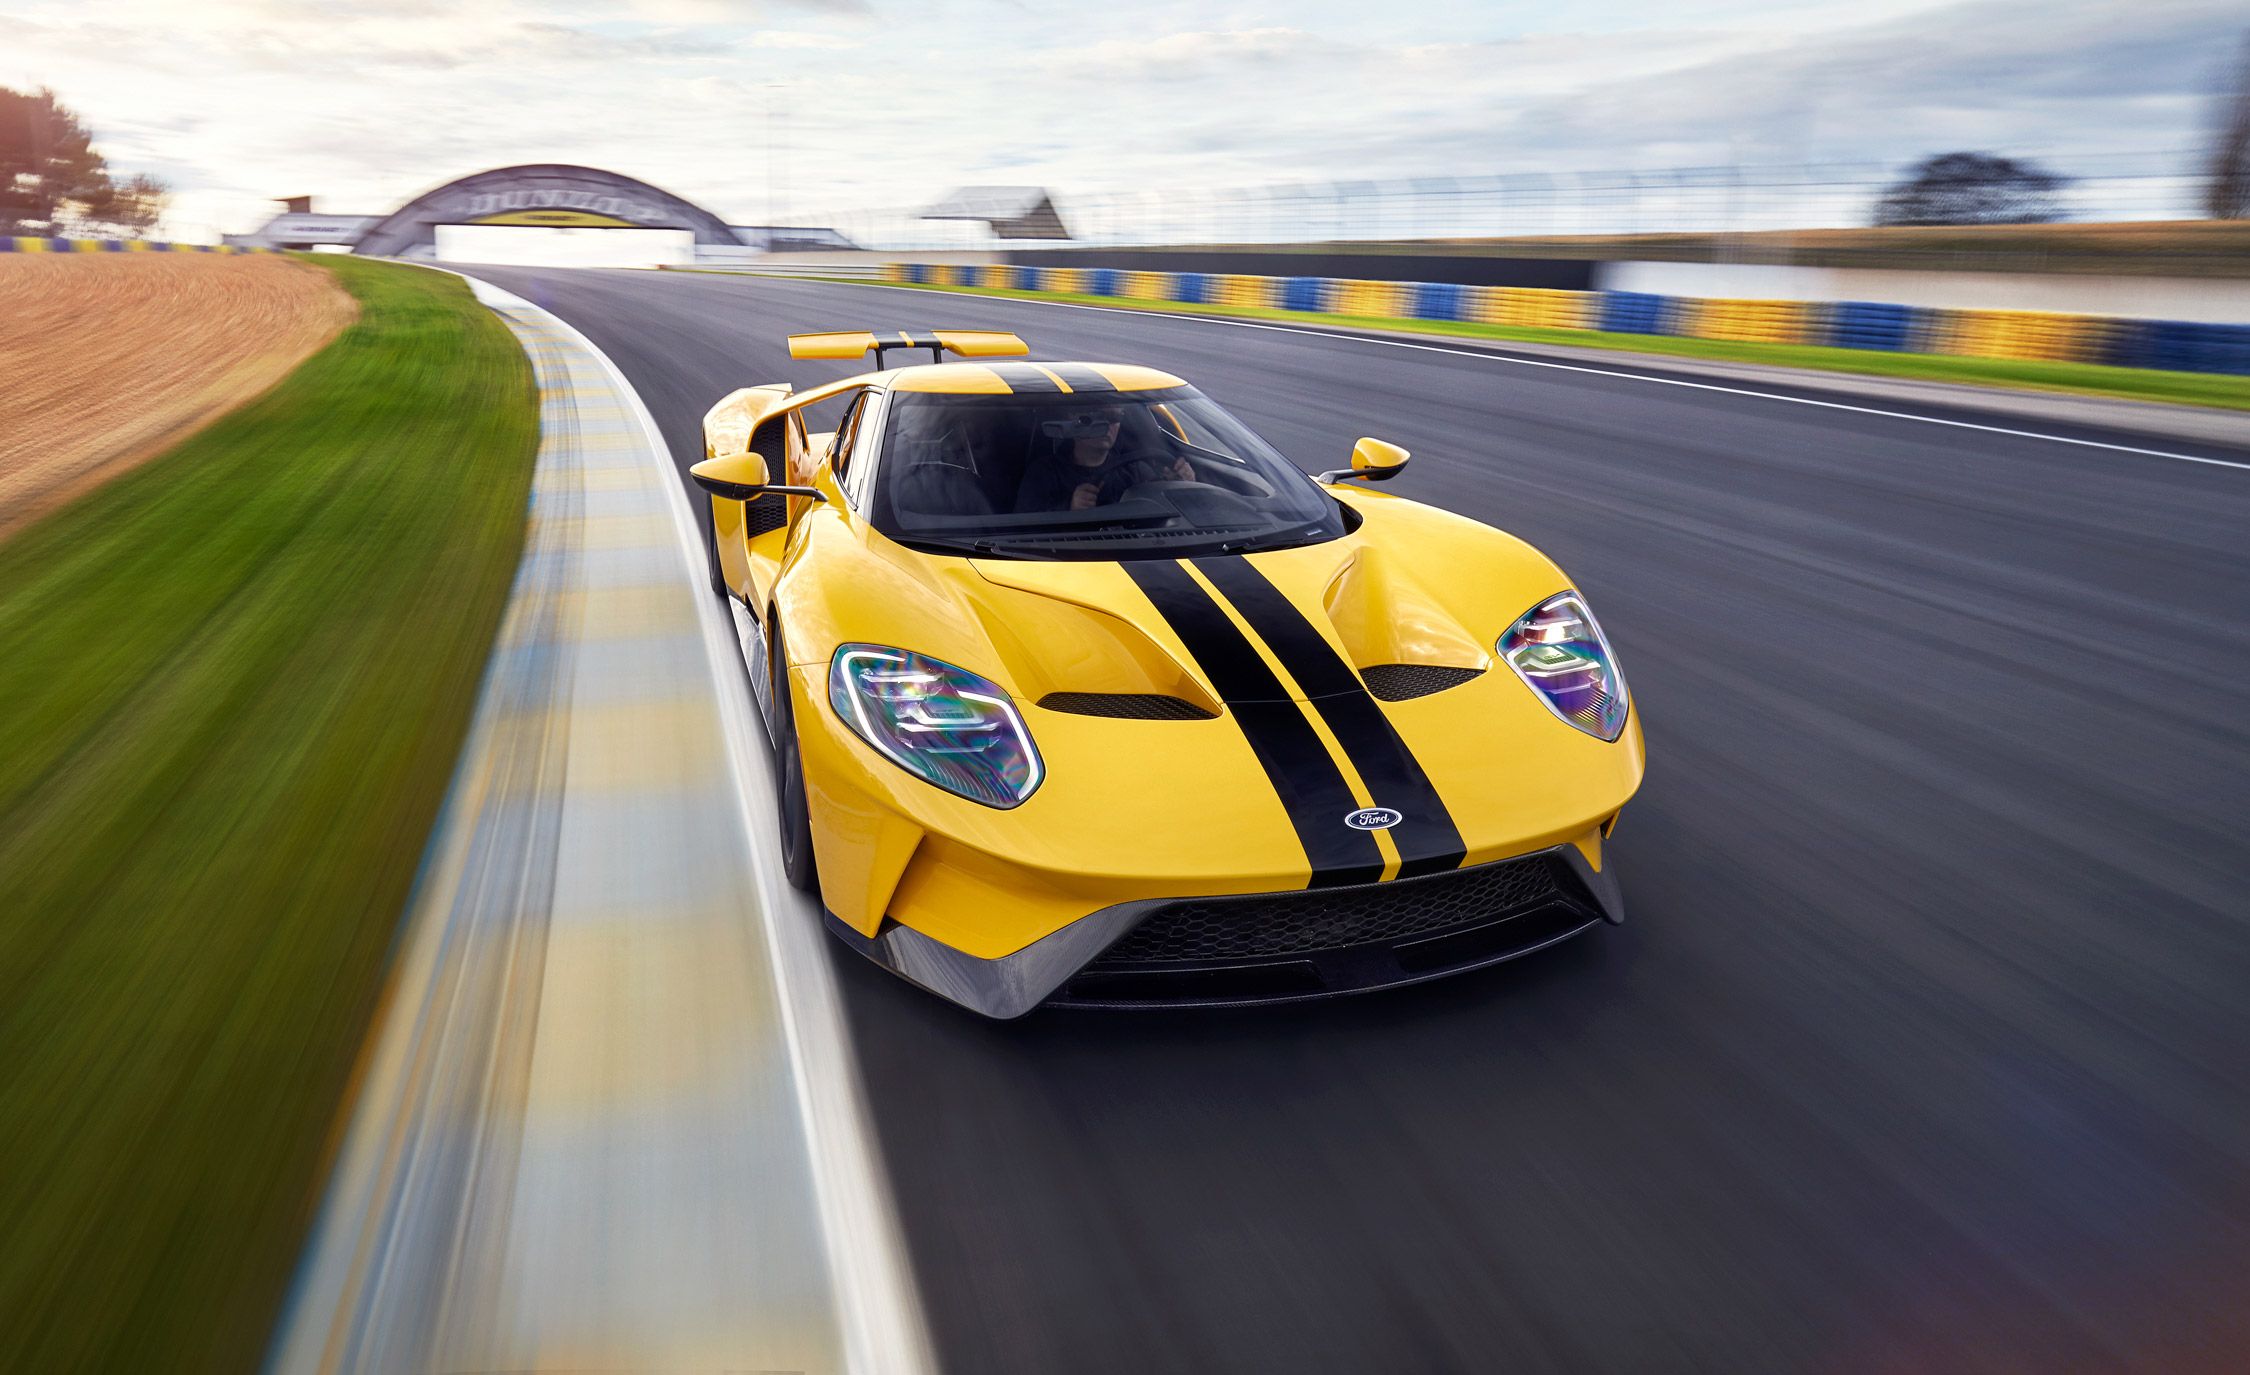 New Ford GT Design Team Featured In Forza 6 Game Promo: Video